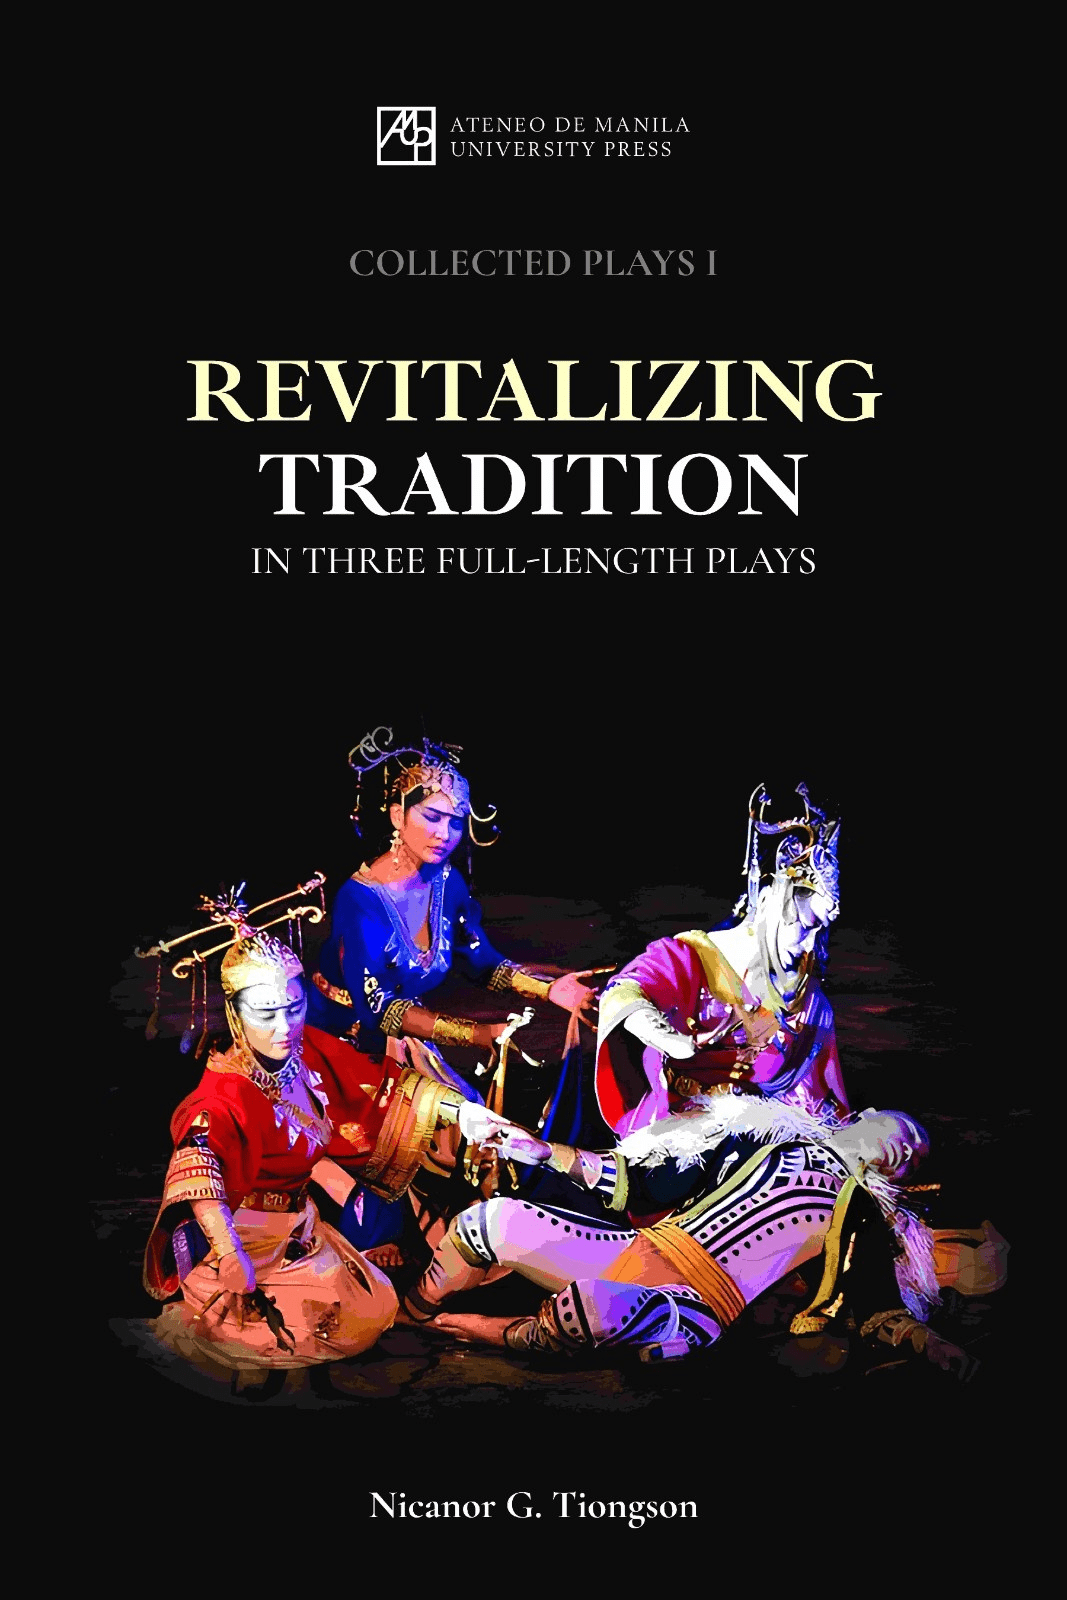 Front Cover of Collected Plays I: Revitalizing Tradition